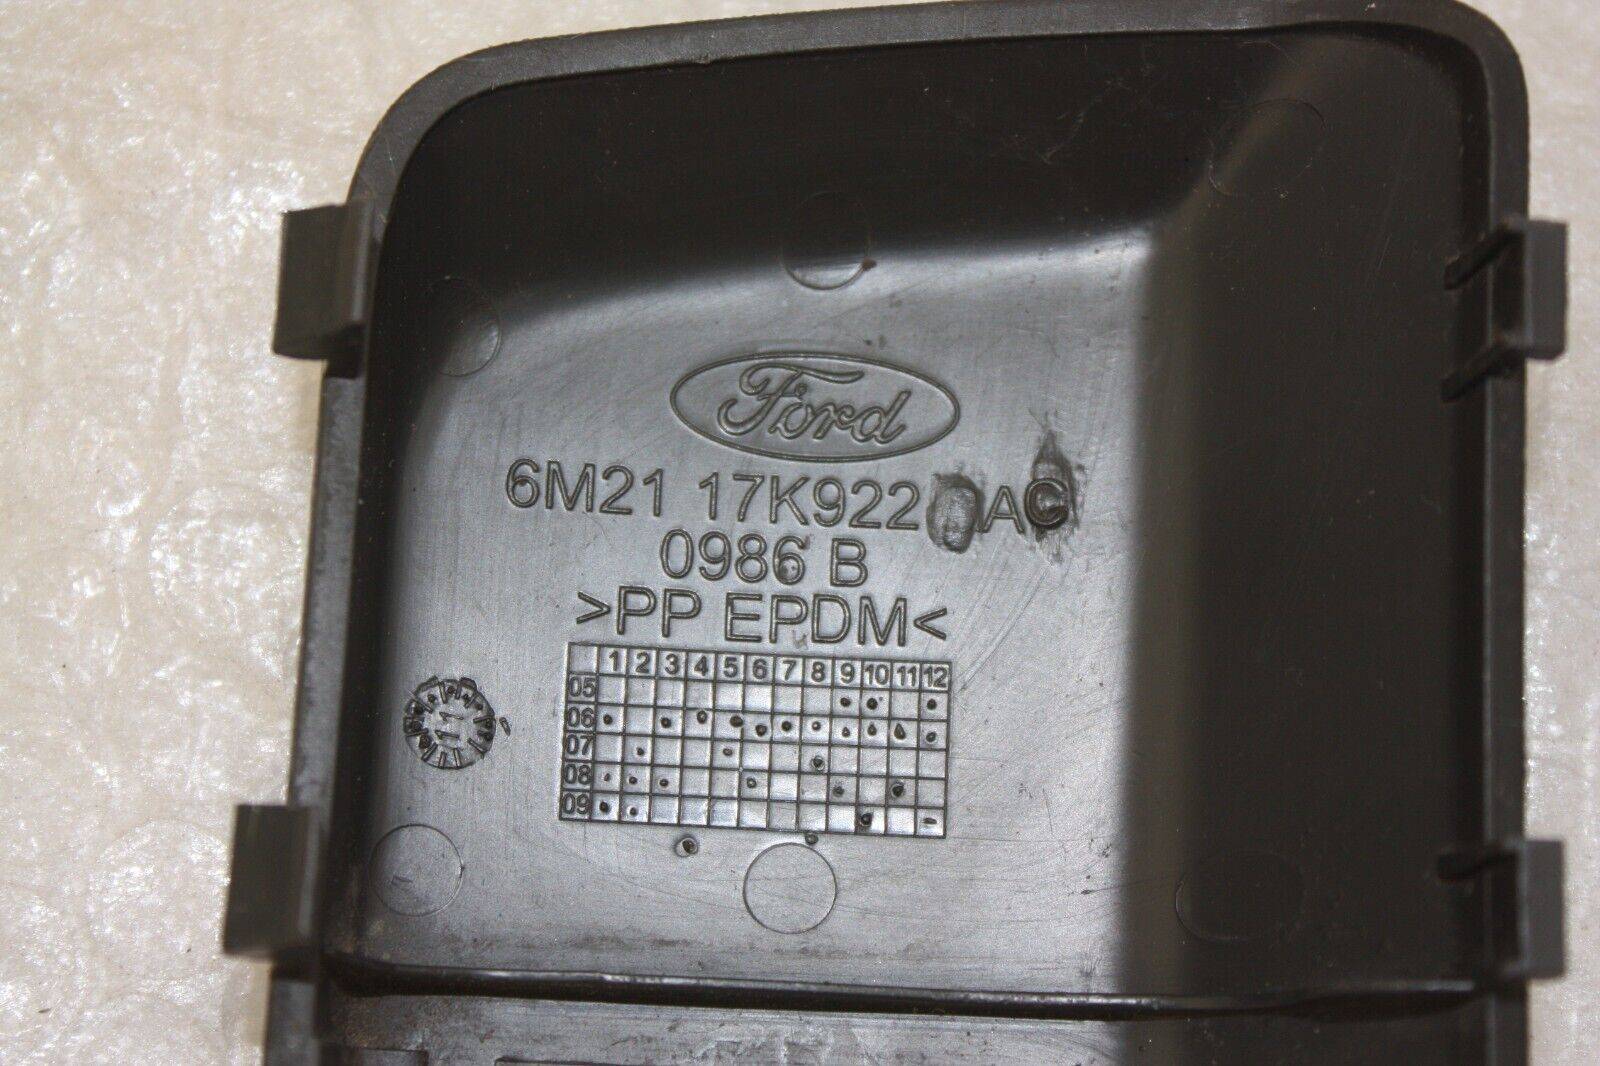 Ford-Galaxy-Rear-Bumper-Tow-Cover-2006-TO-2010-6M21-17K922-AC-Genuine-176312855183-5